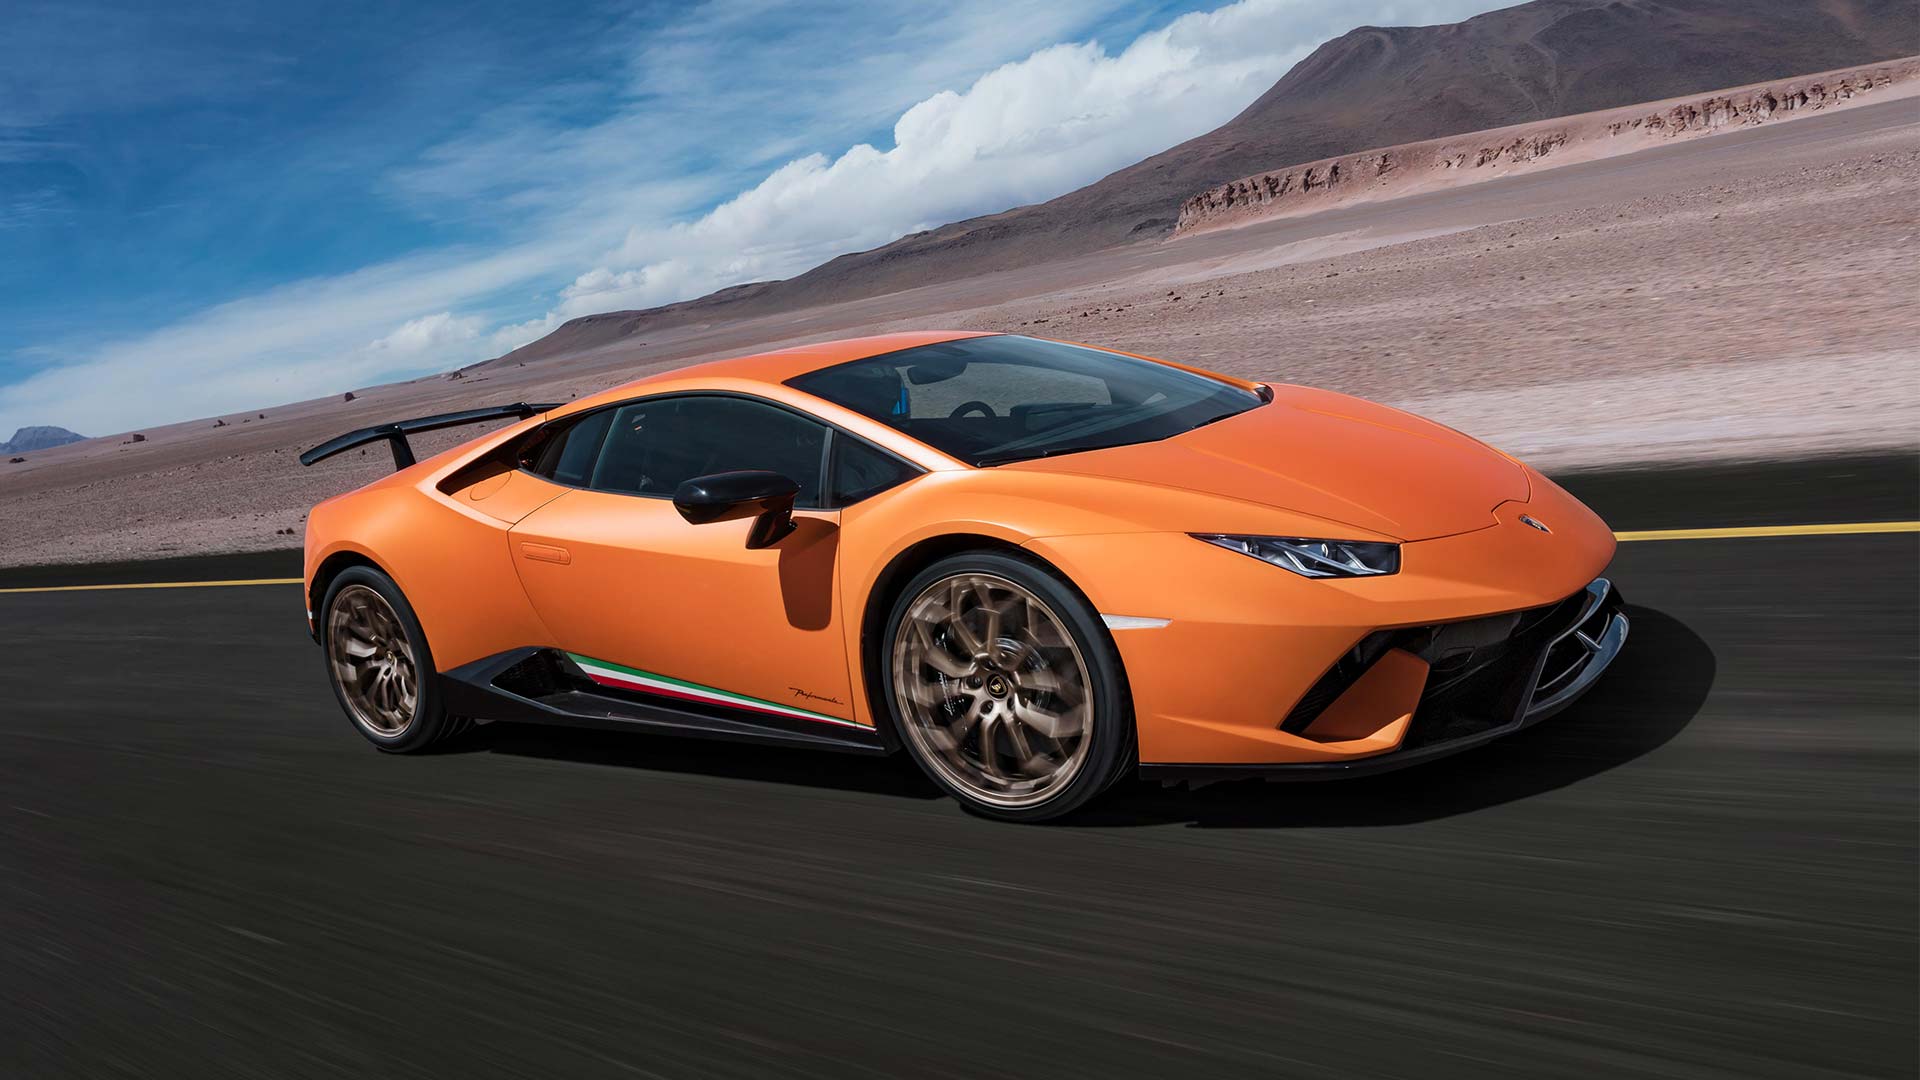 Lamborghini Car Dealership near Fort Lauderdale FL | New and Used Cars, Parts, and Service near ...